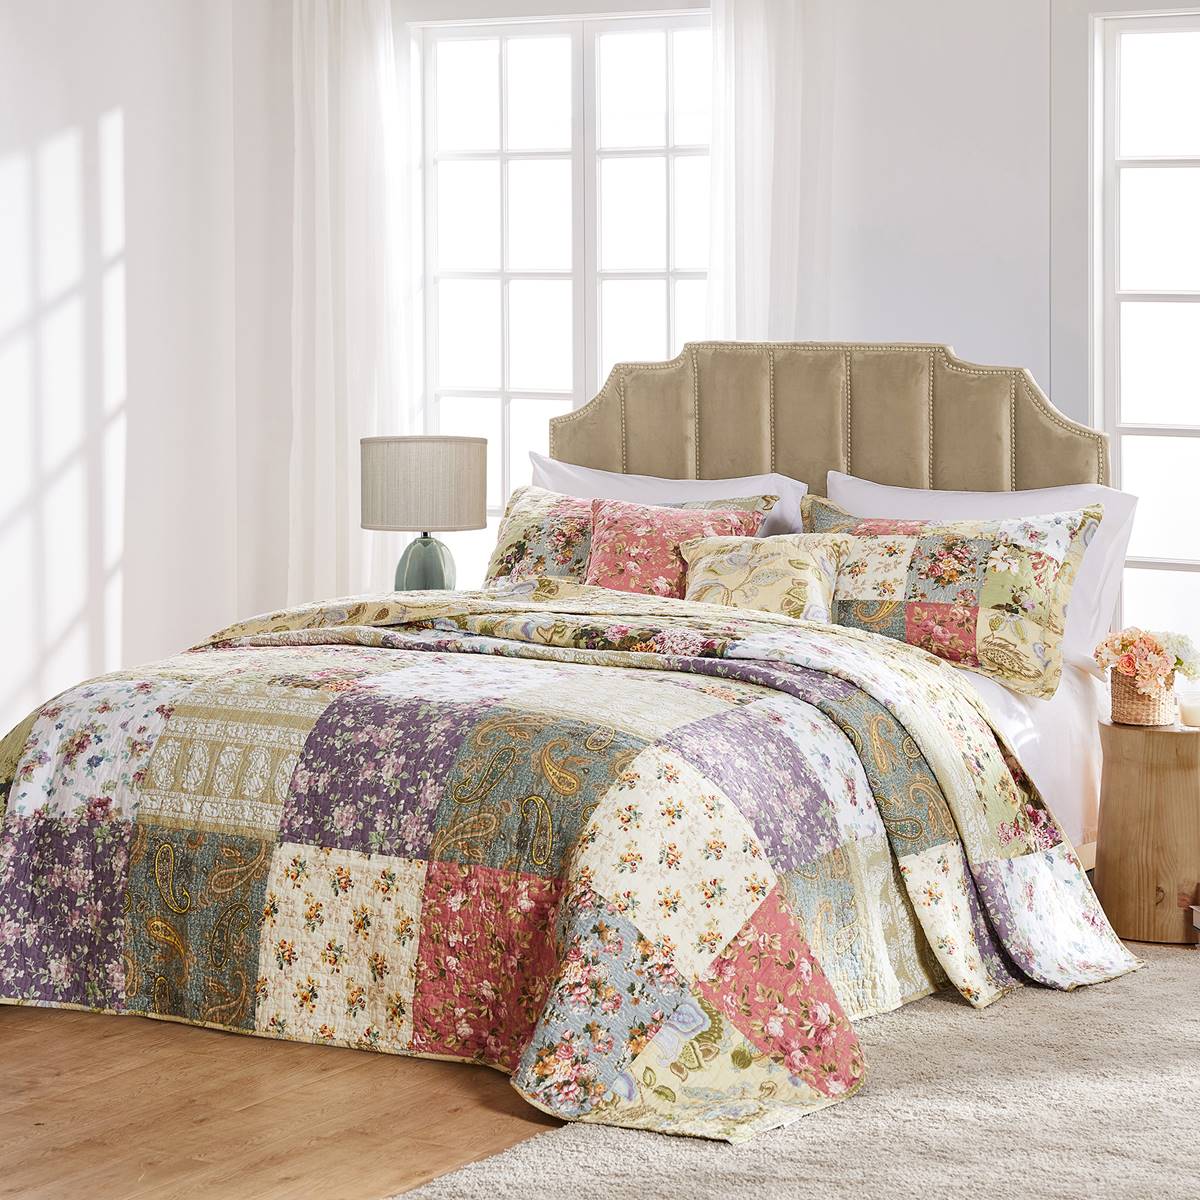 Greenland Home Fashions(tm) Blooming Prairie Patchwork Bedspread Set